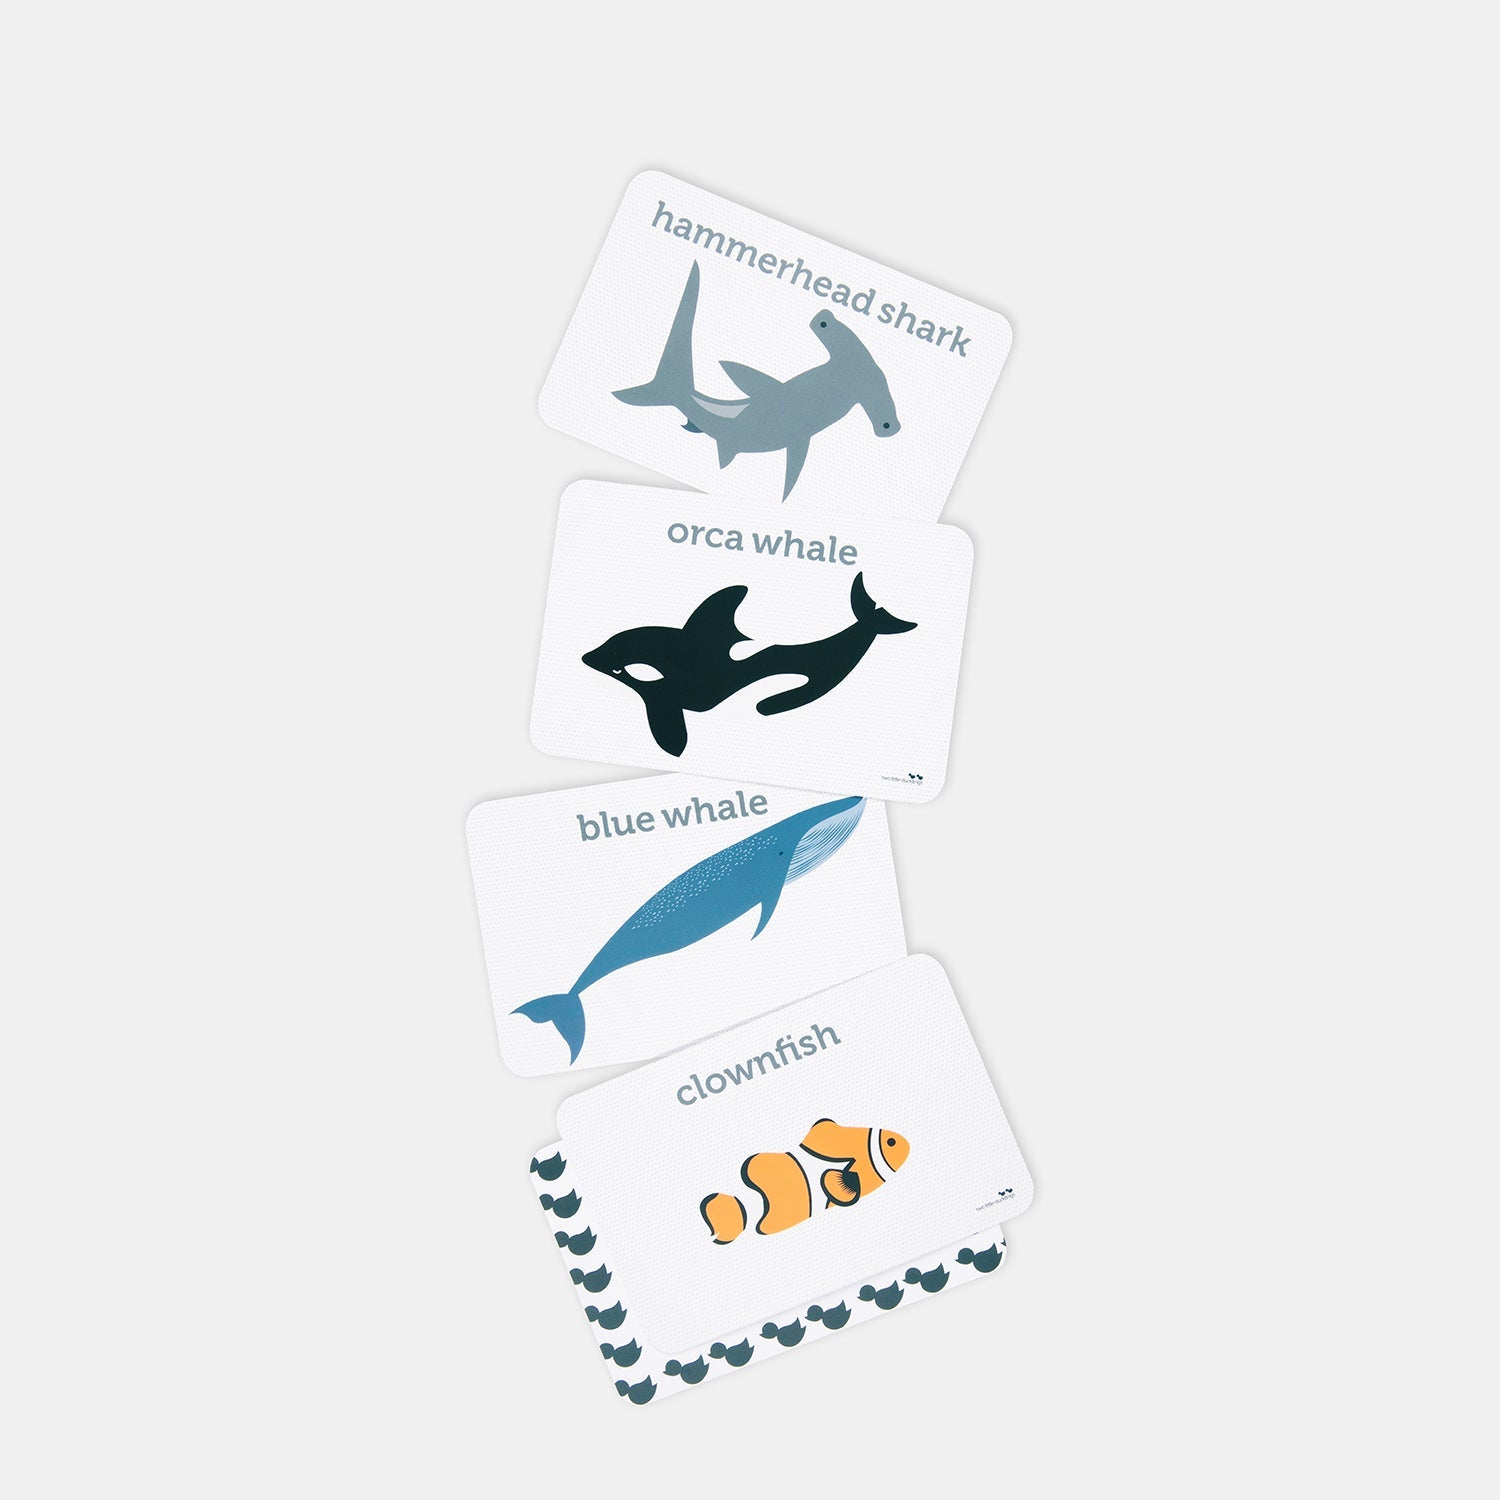 SEA LIFE FLASH CARDS by TWO LITTLE DUCKLINGS - The Playful Collective